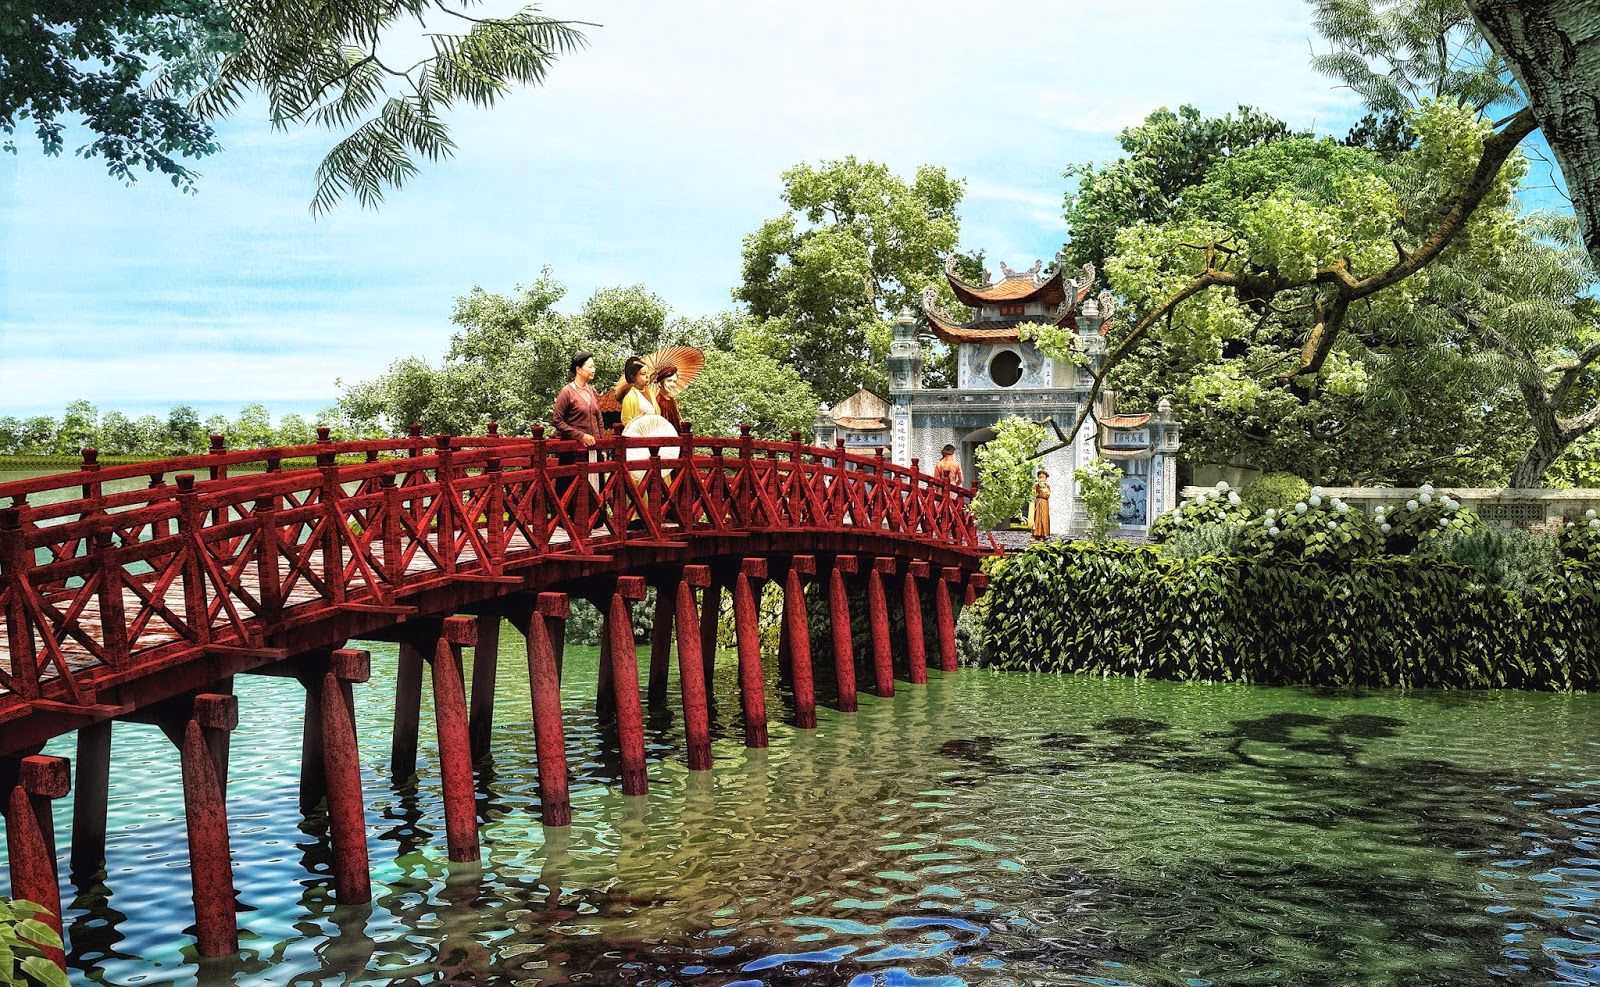 Why Ngoc Son temple is a famous attraction of Hanoi? The Open time to